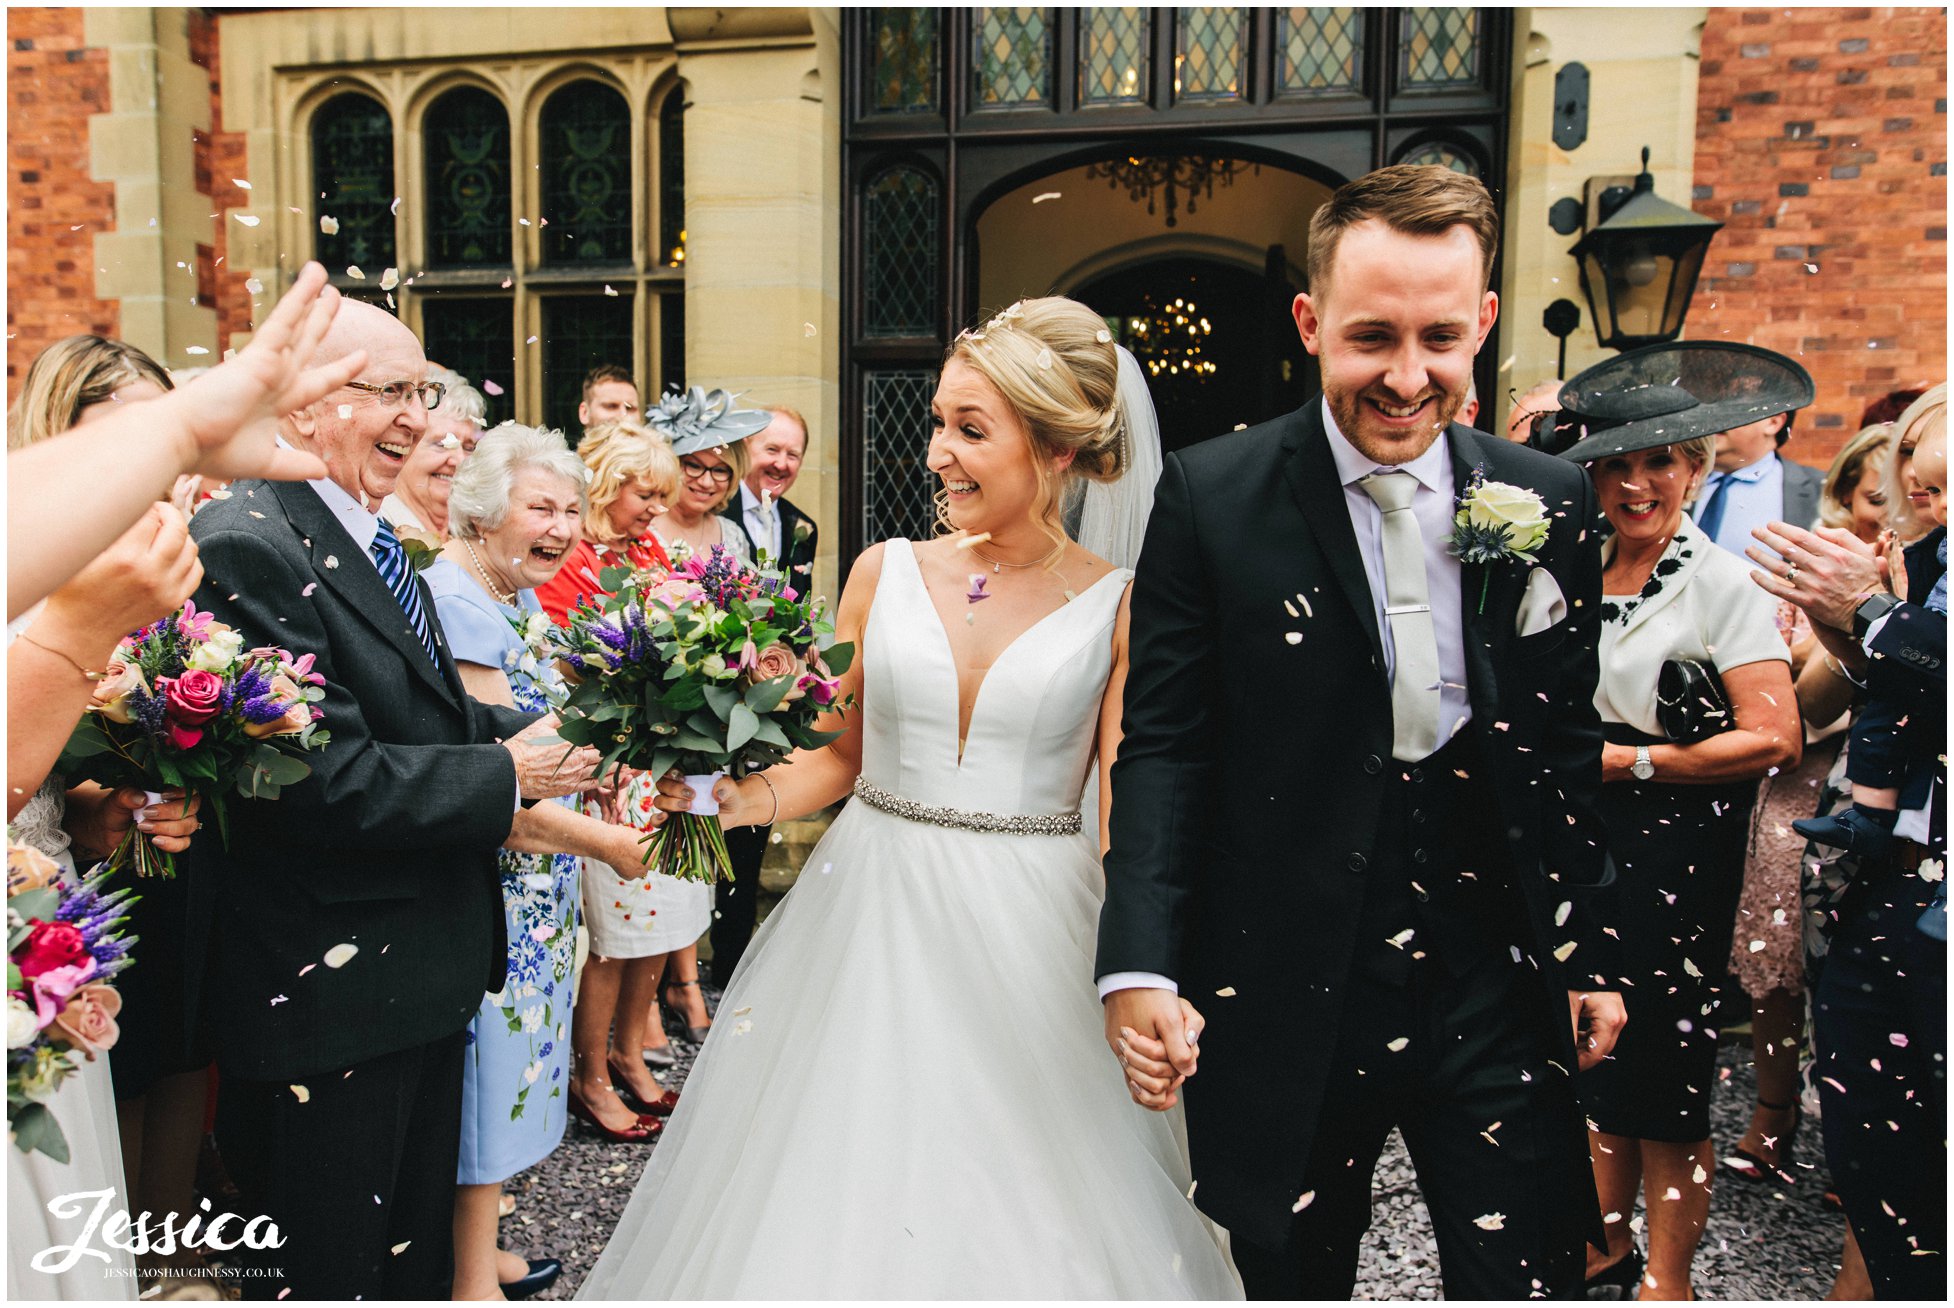 guests throw confetti over the couple